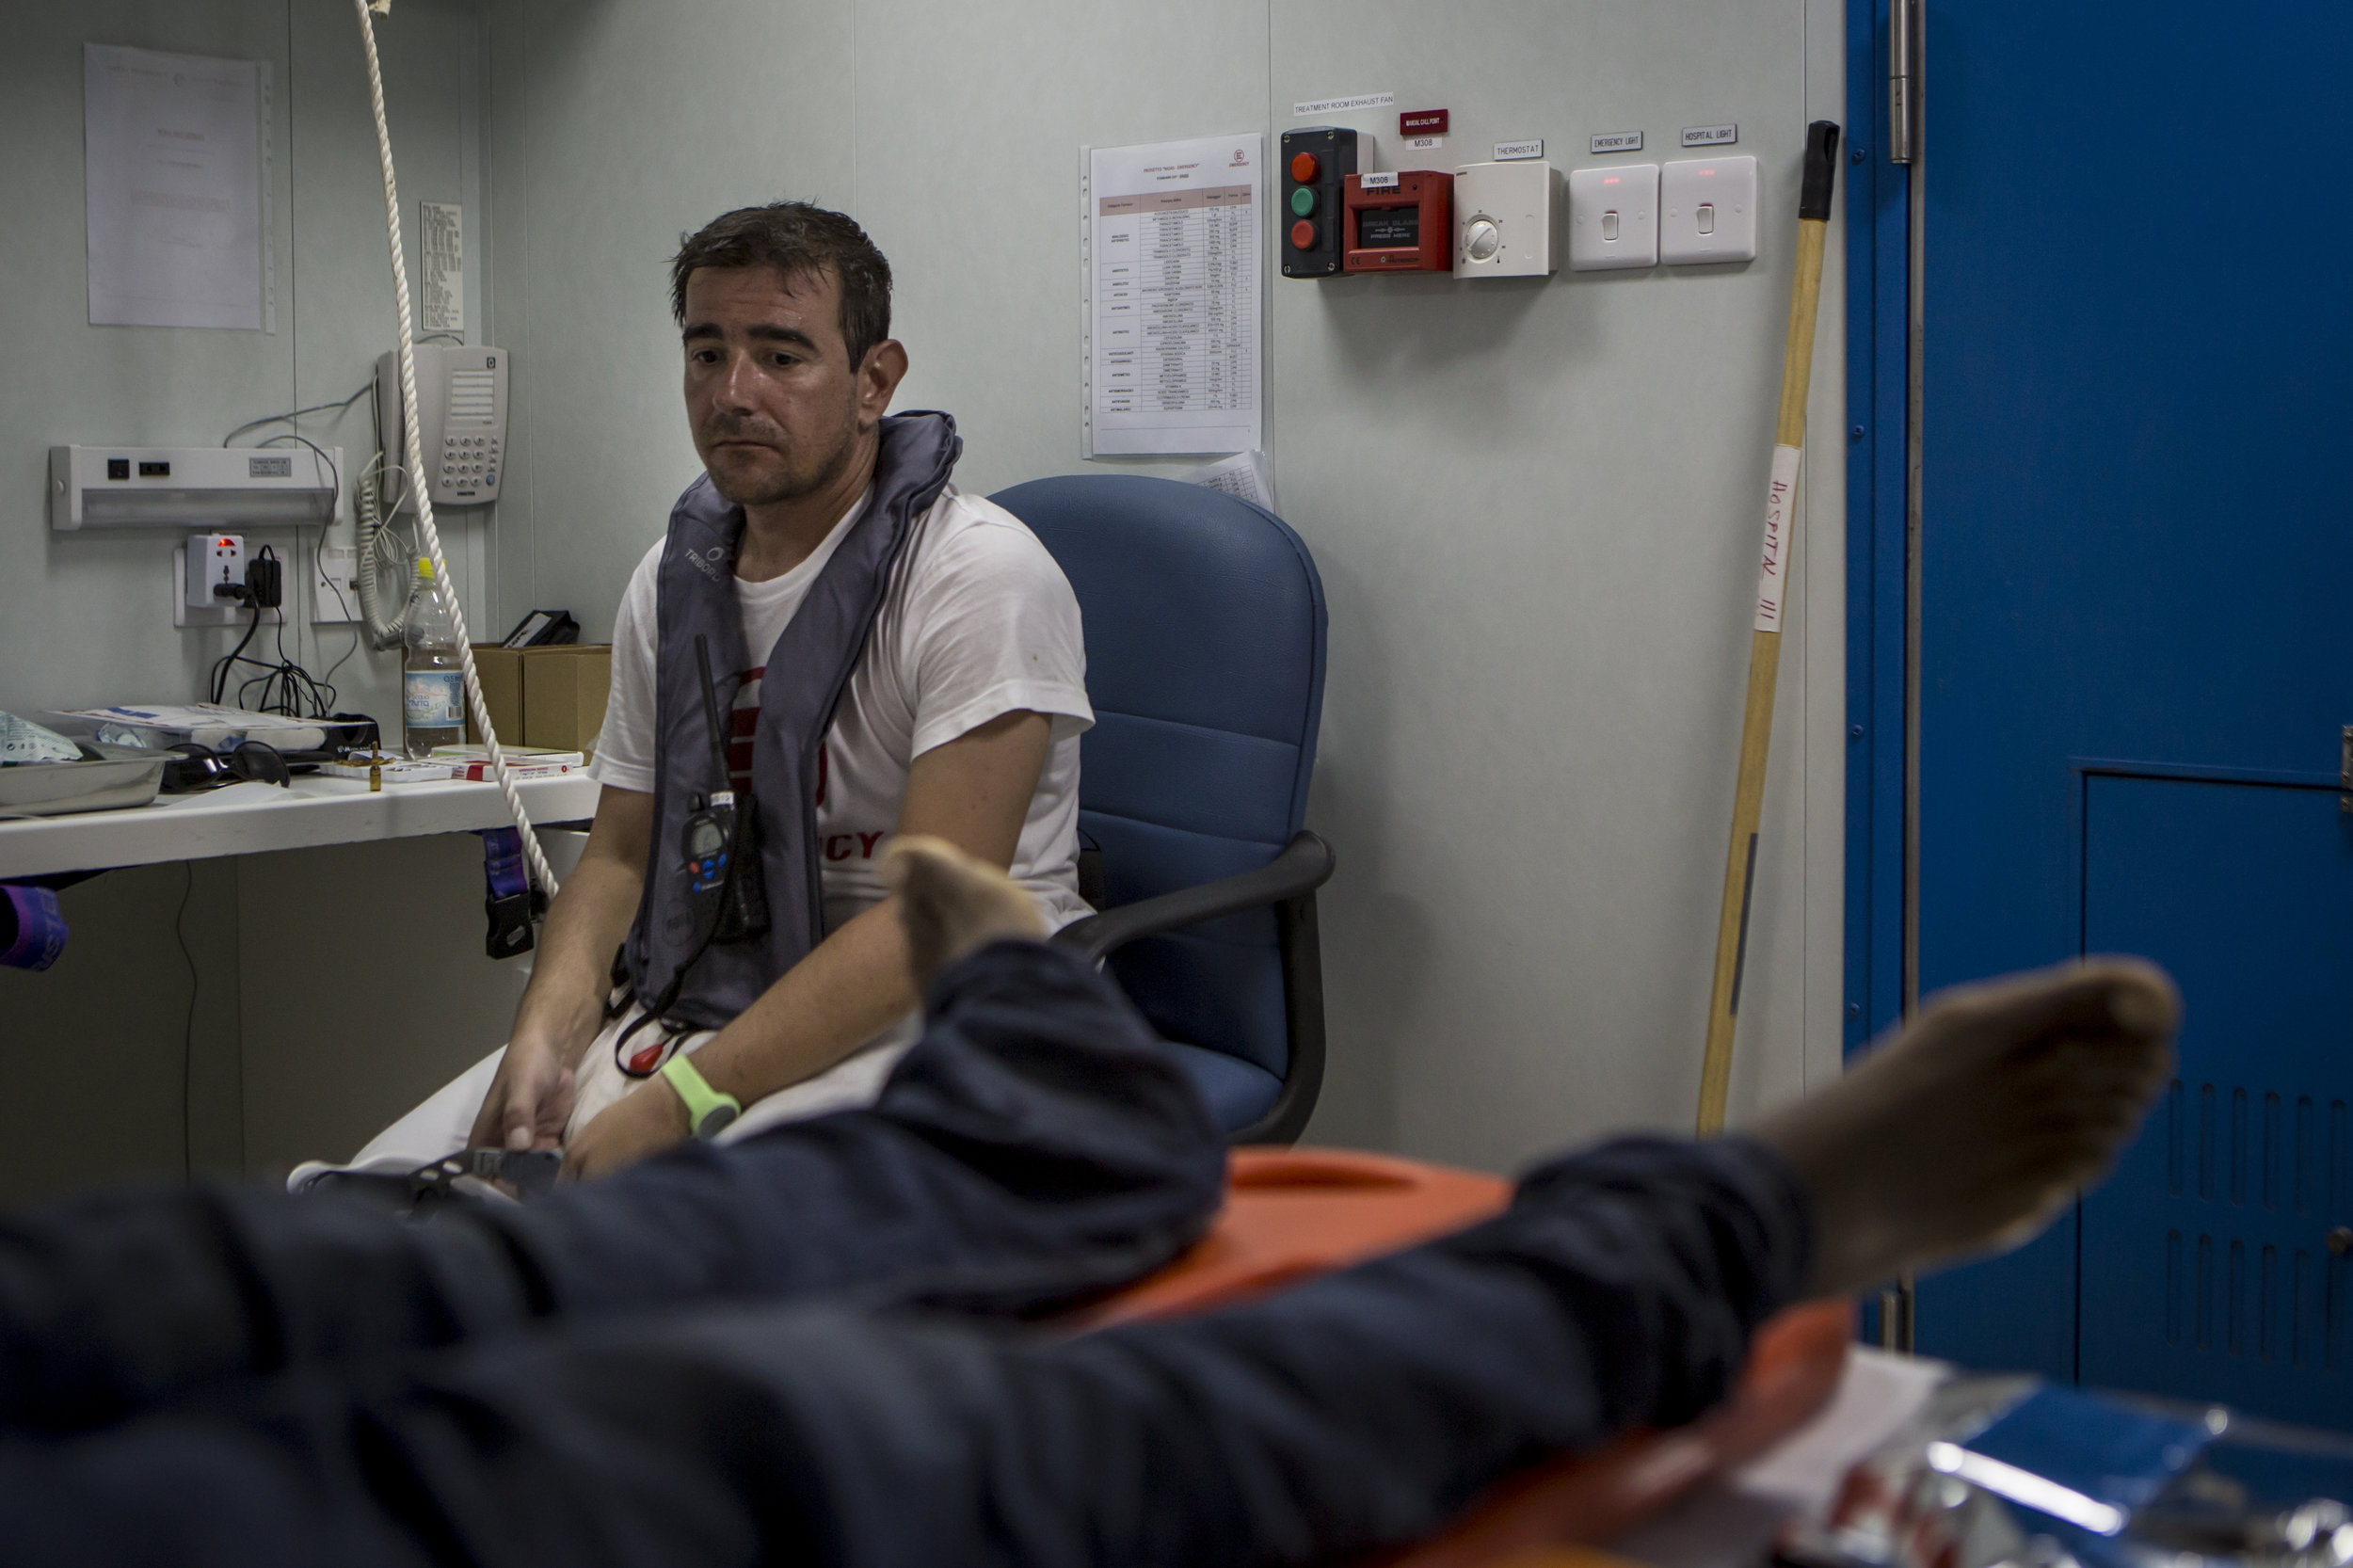  Doctor Alberto, moments after calling the death of an eritrean man. 20 minutes of CPR and multiple shots of adrenaline didn't bring him back. � Mathieu Willcocks/MOAS.eu 2016, all rights reserved. 